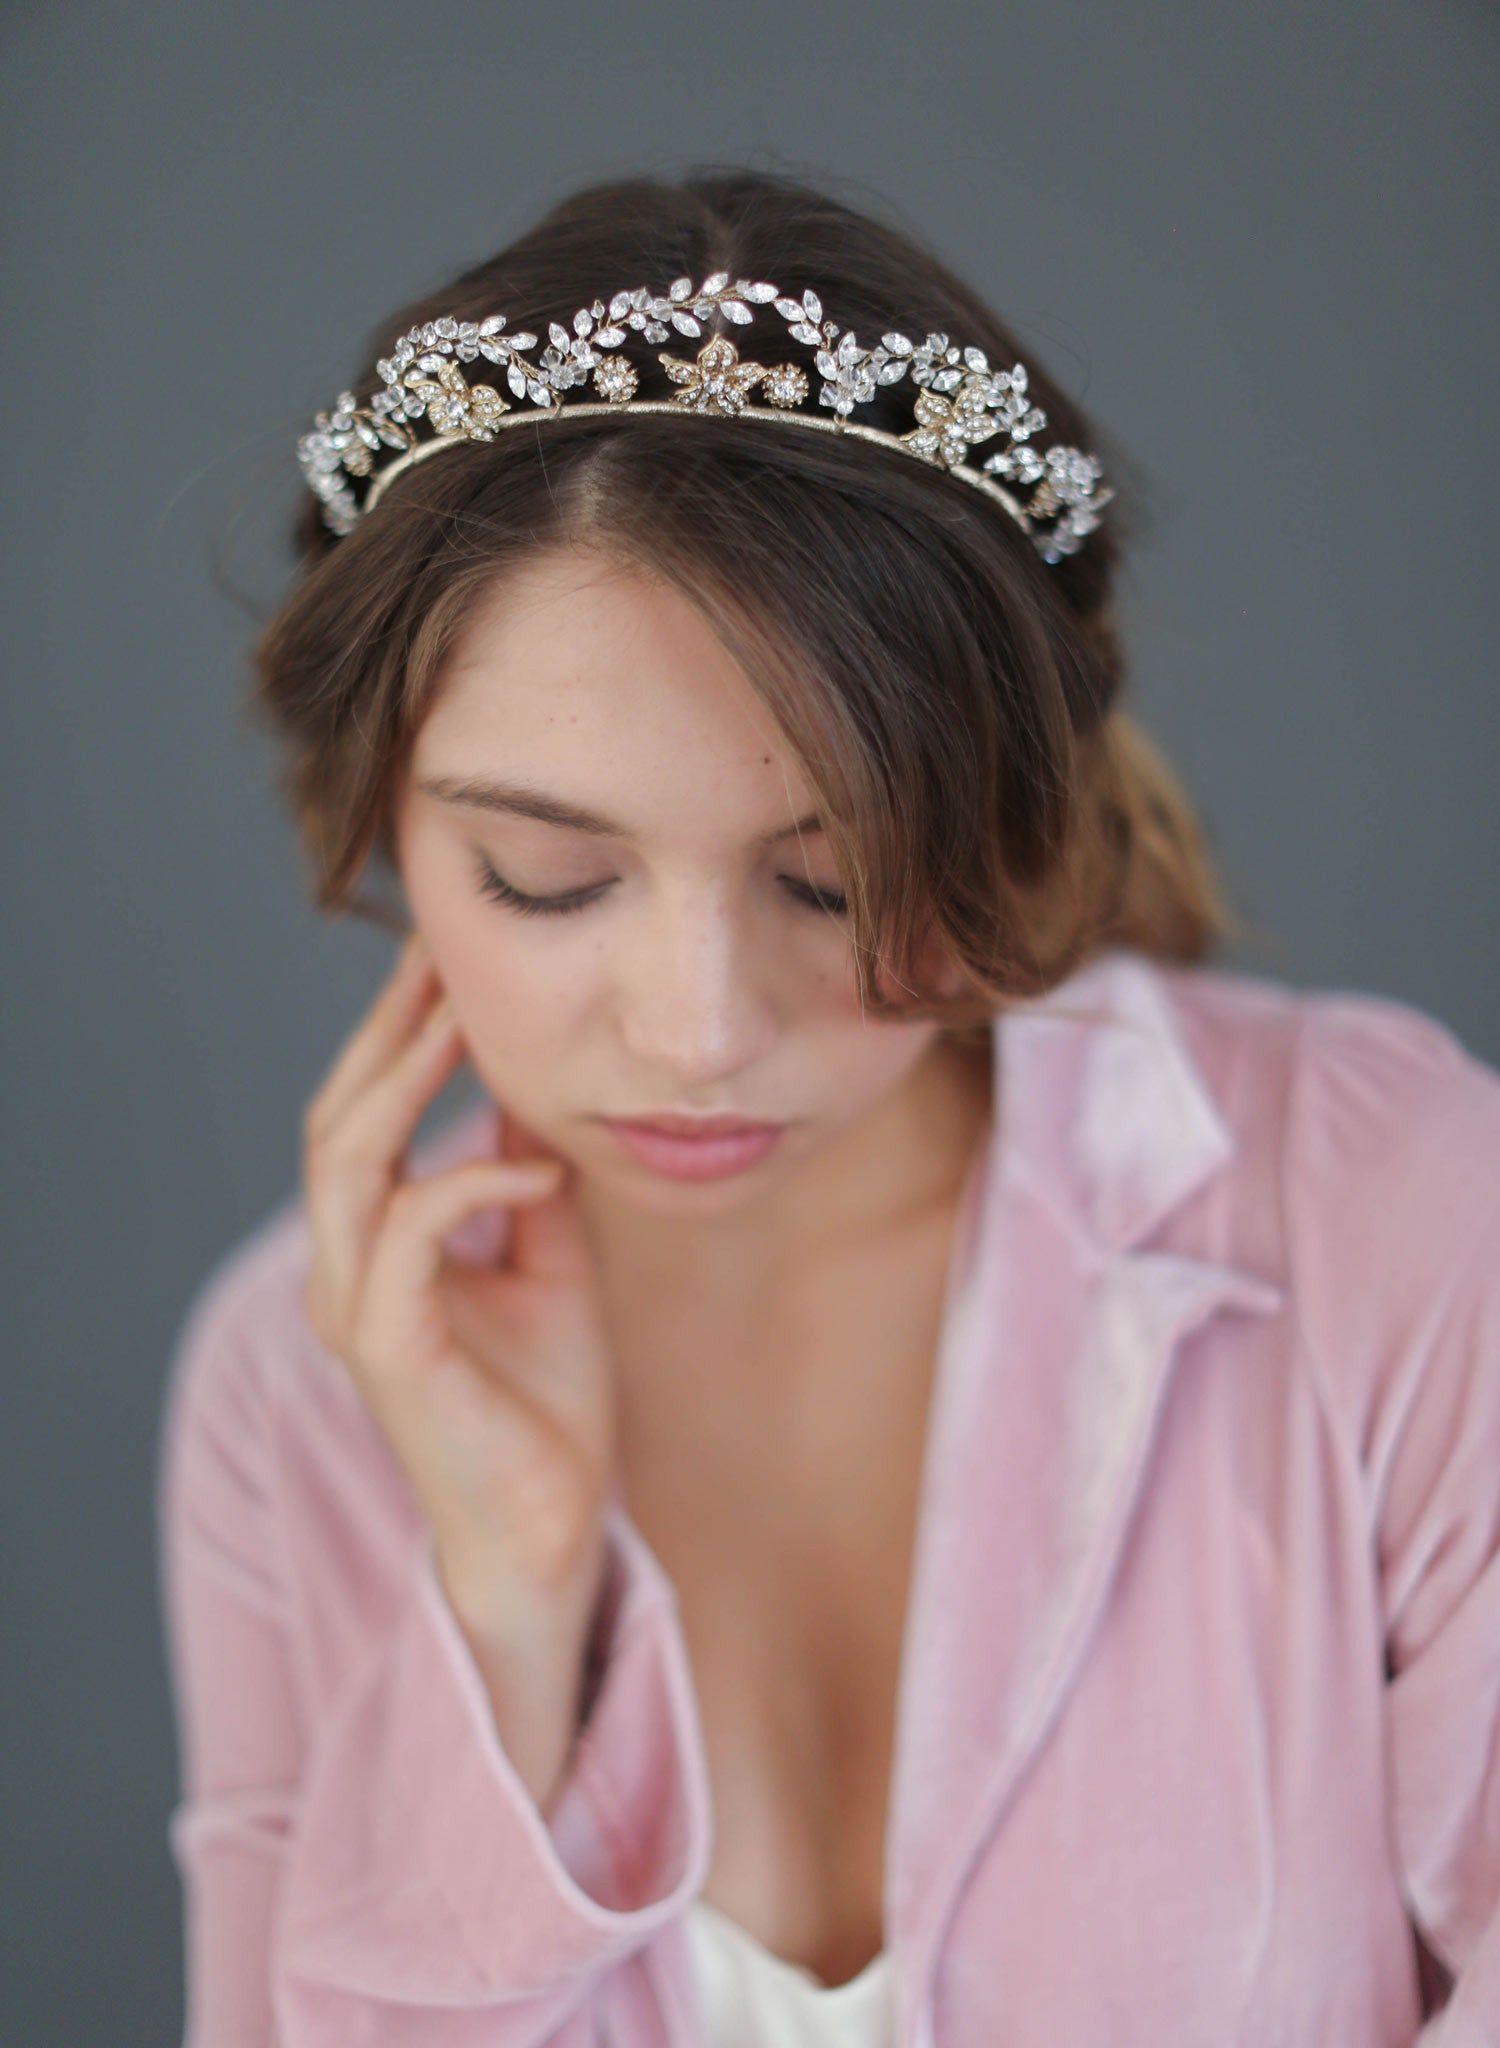 Floral tiara with navette crystal arches - Style #611